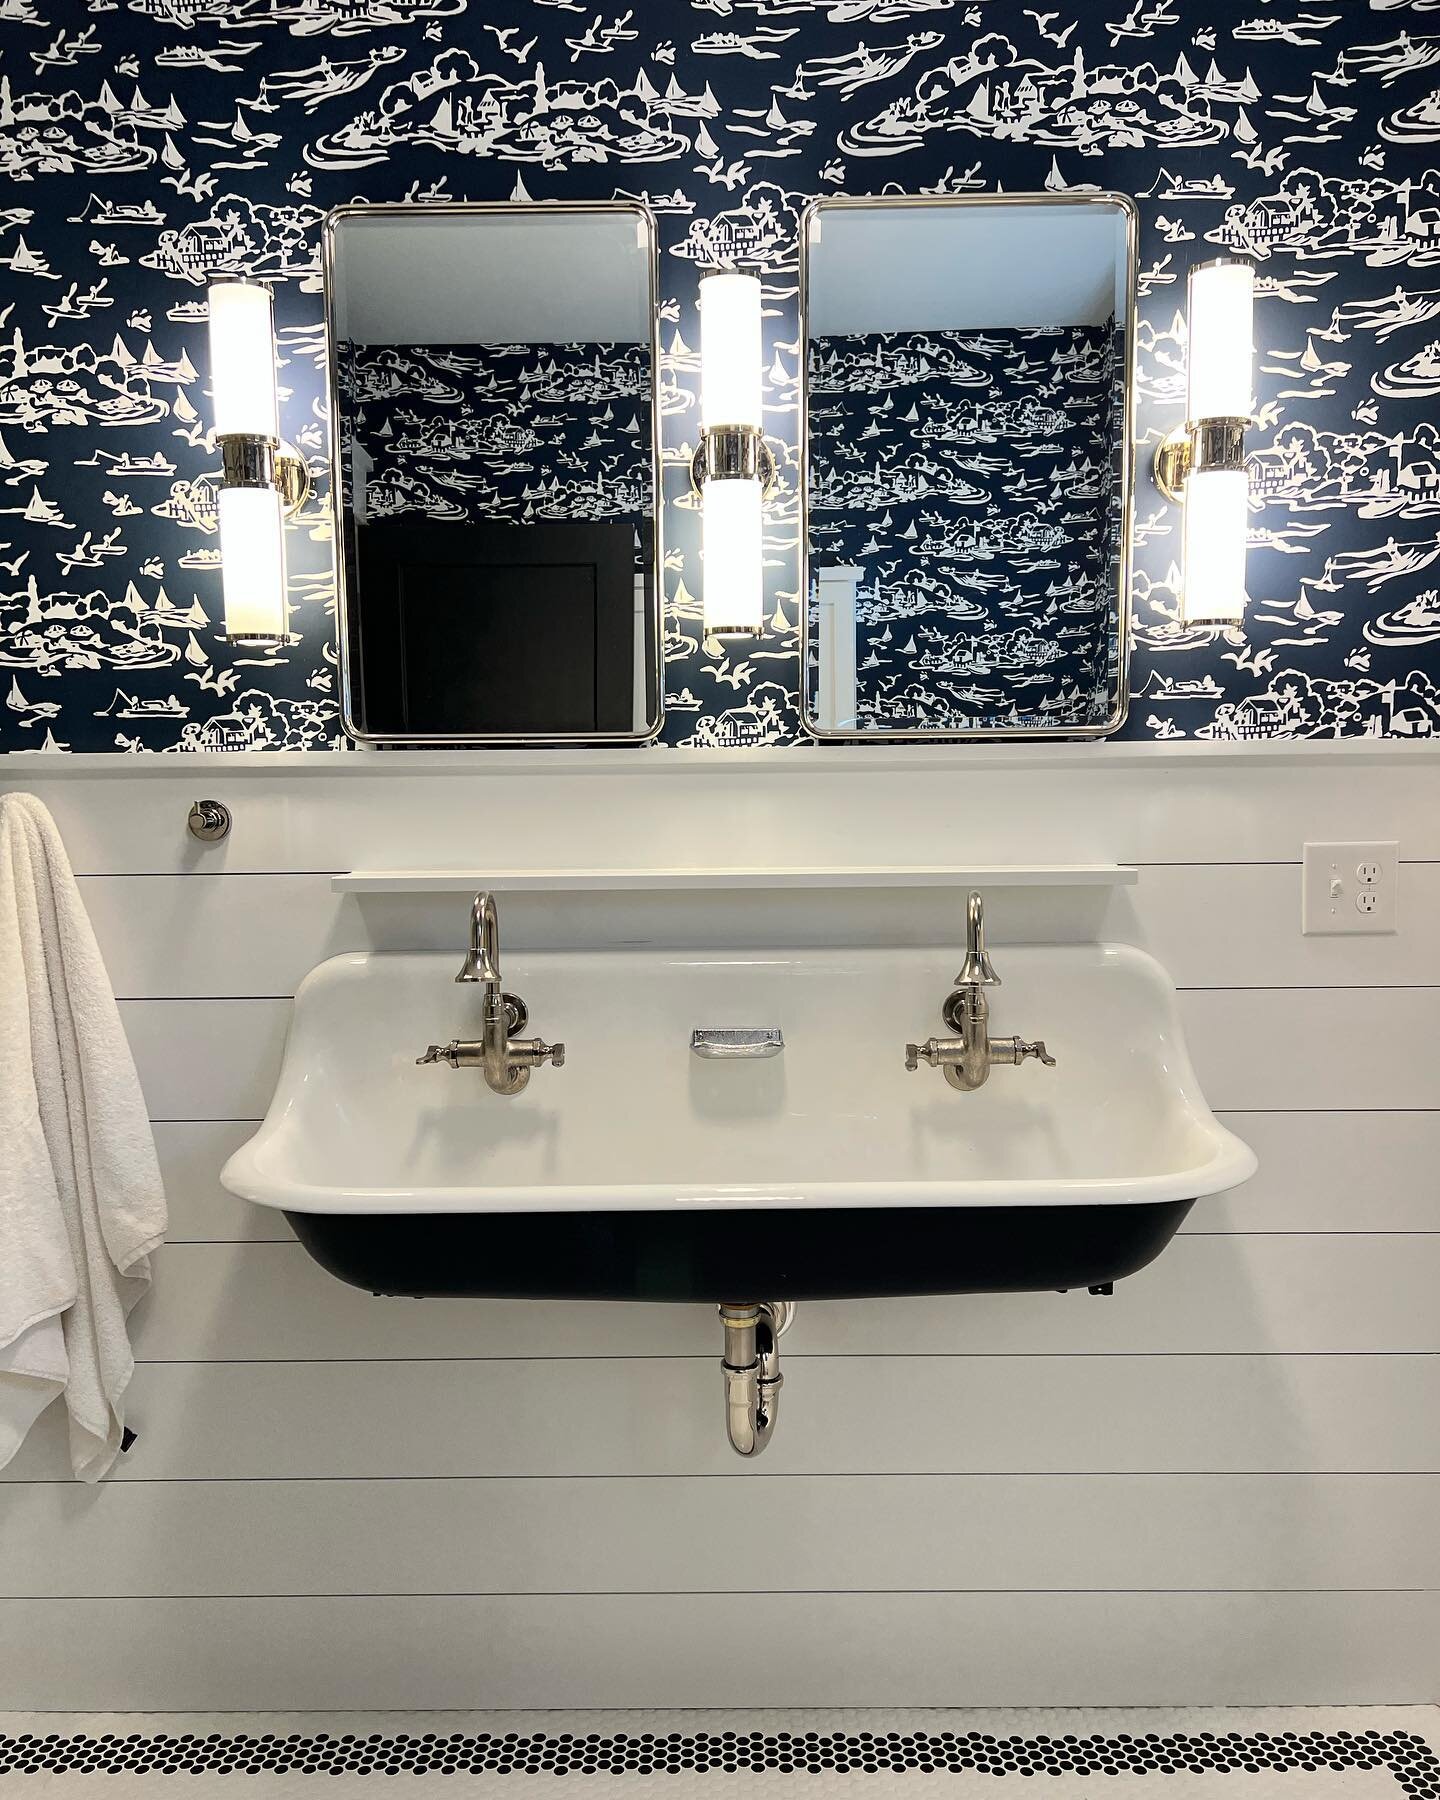 Check out our latest coastal bathroom renovation🛁 Swipe left to see the before pictures. 

#blueandwhitebathrooms 
Navyandwhitebathrooms
#pennytilebathrooms
#coastalbathrooms
#nauticalbathrooms